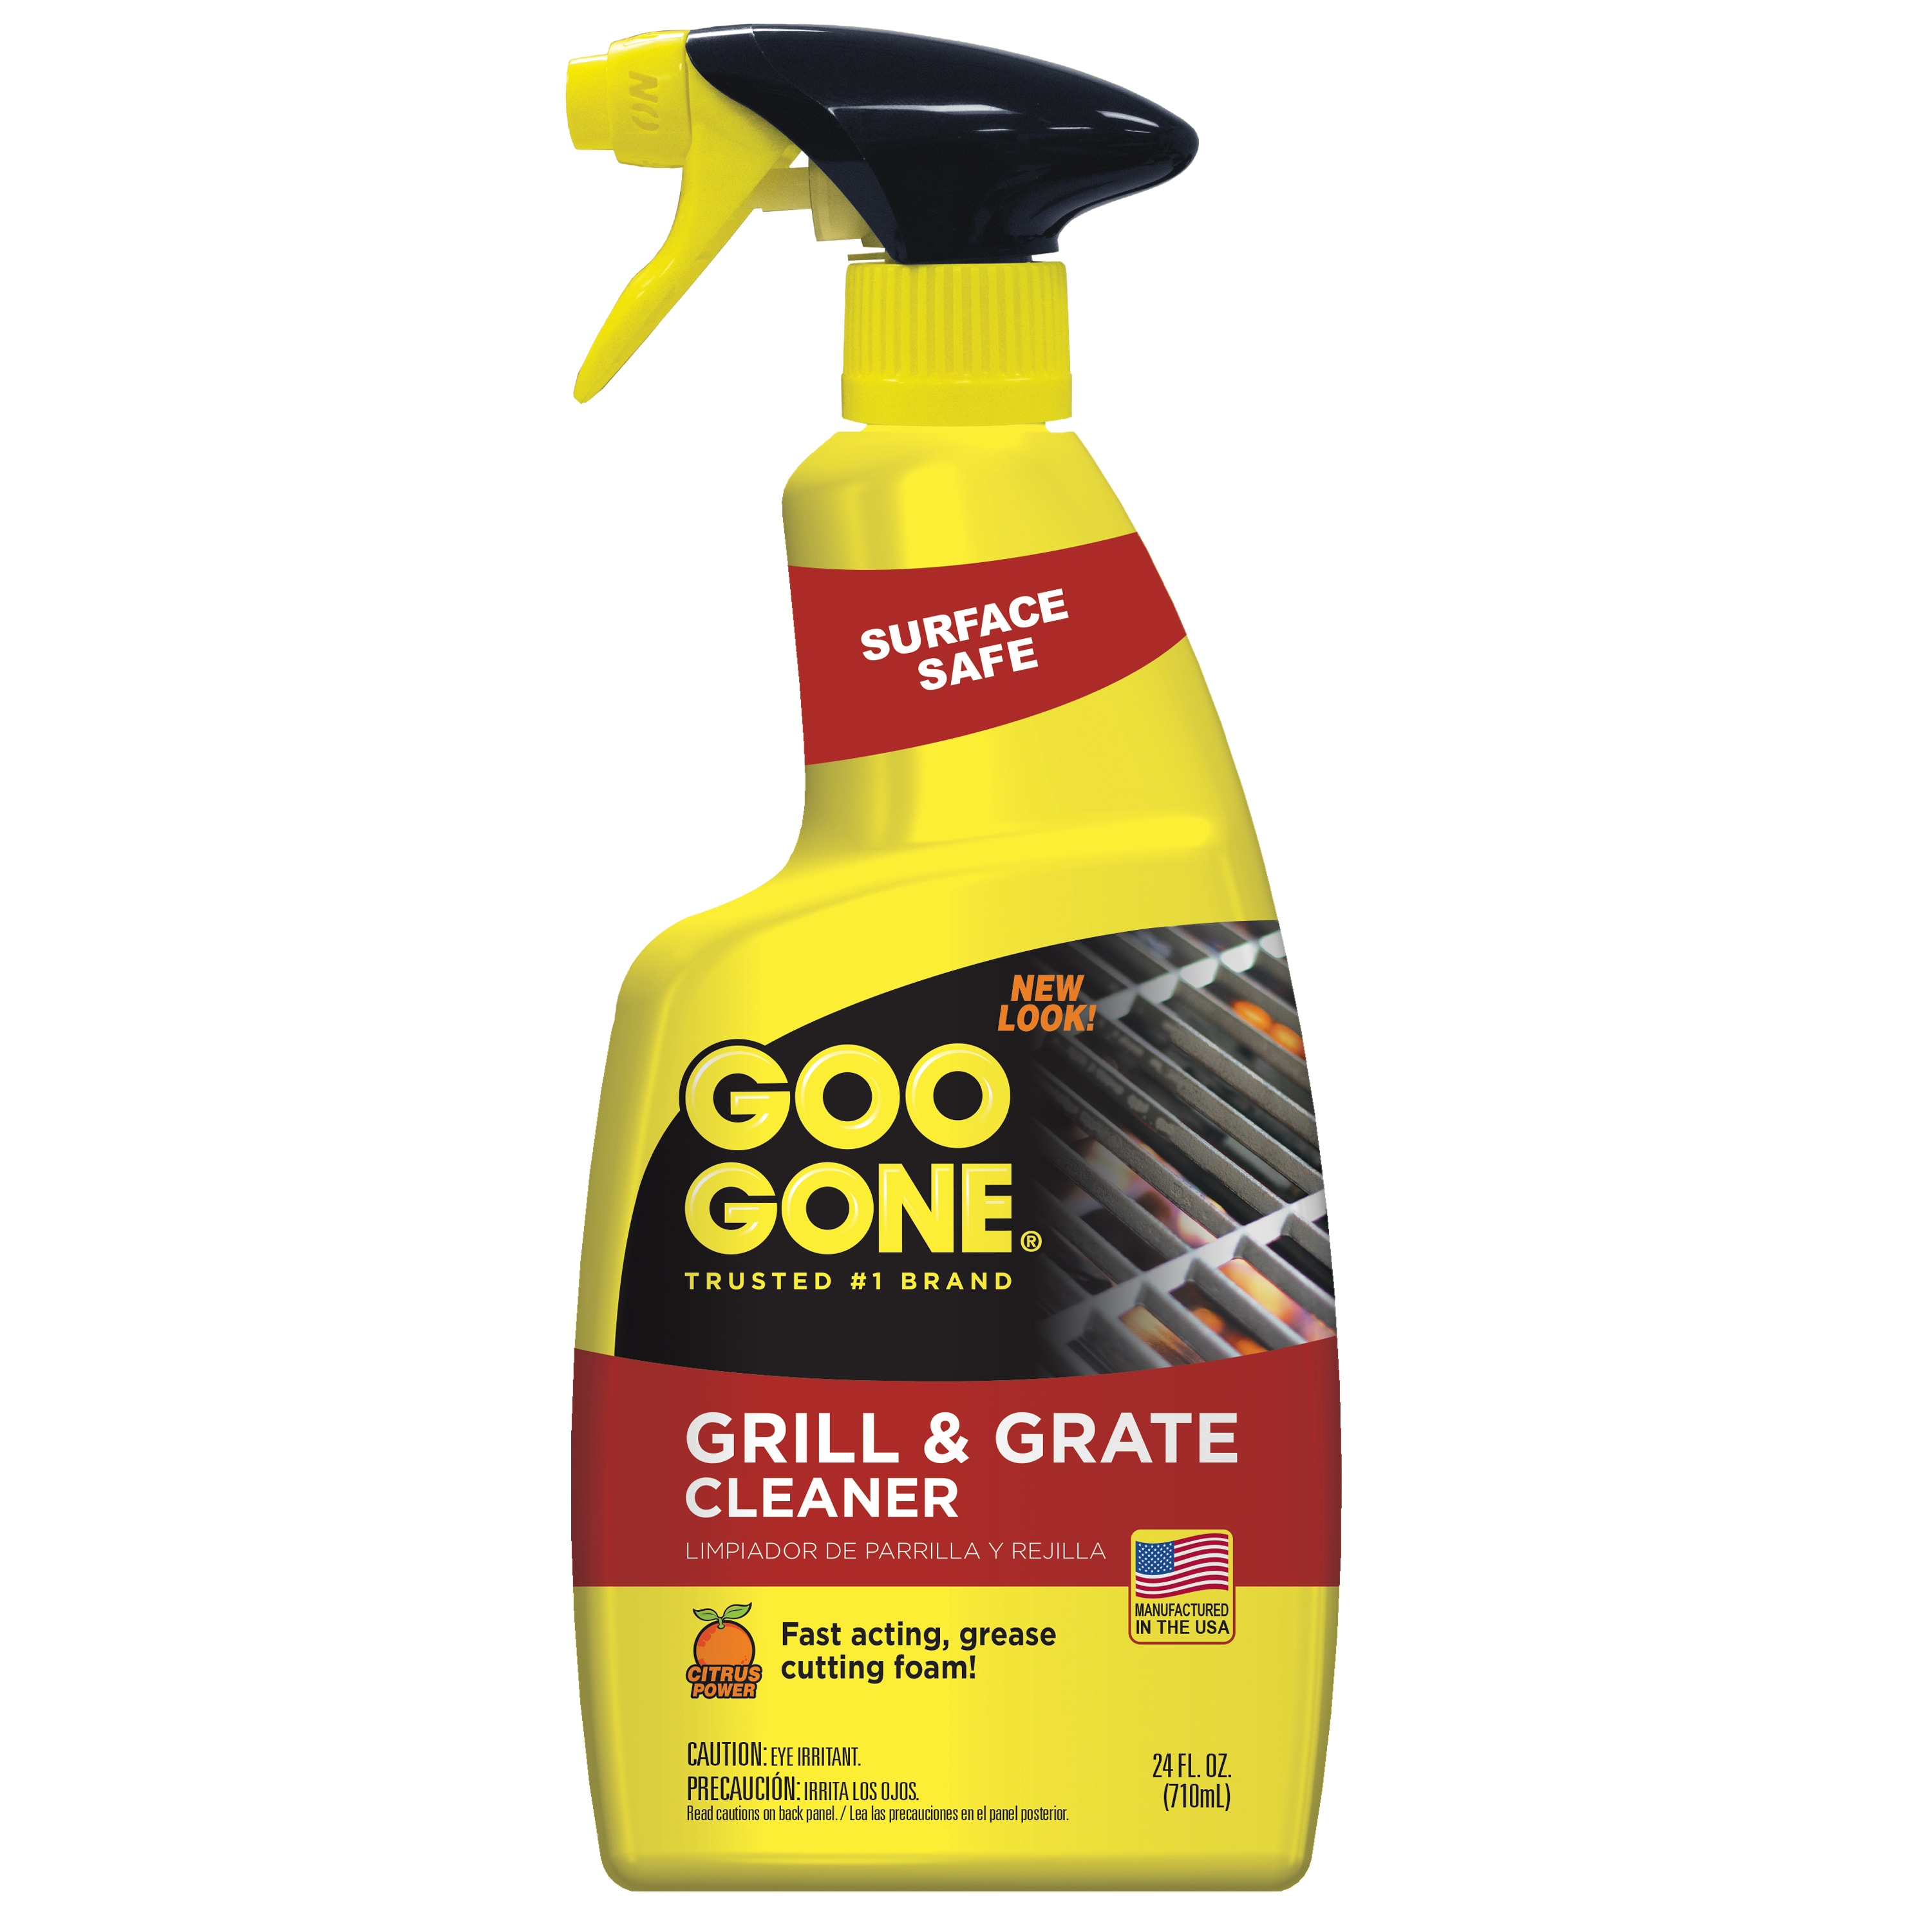 Grill & Grate Cleaning Combo